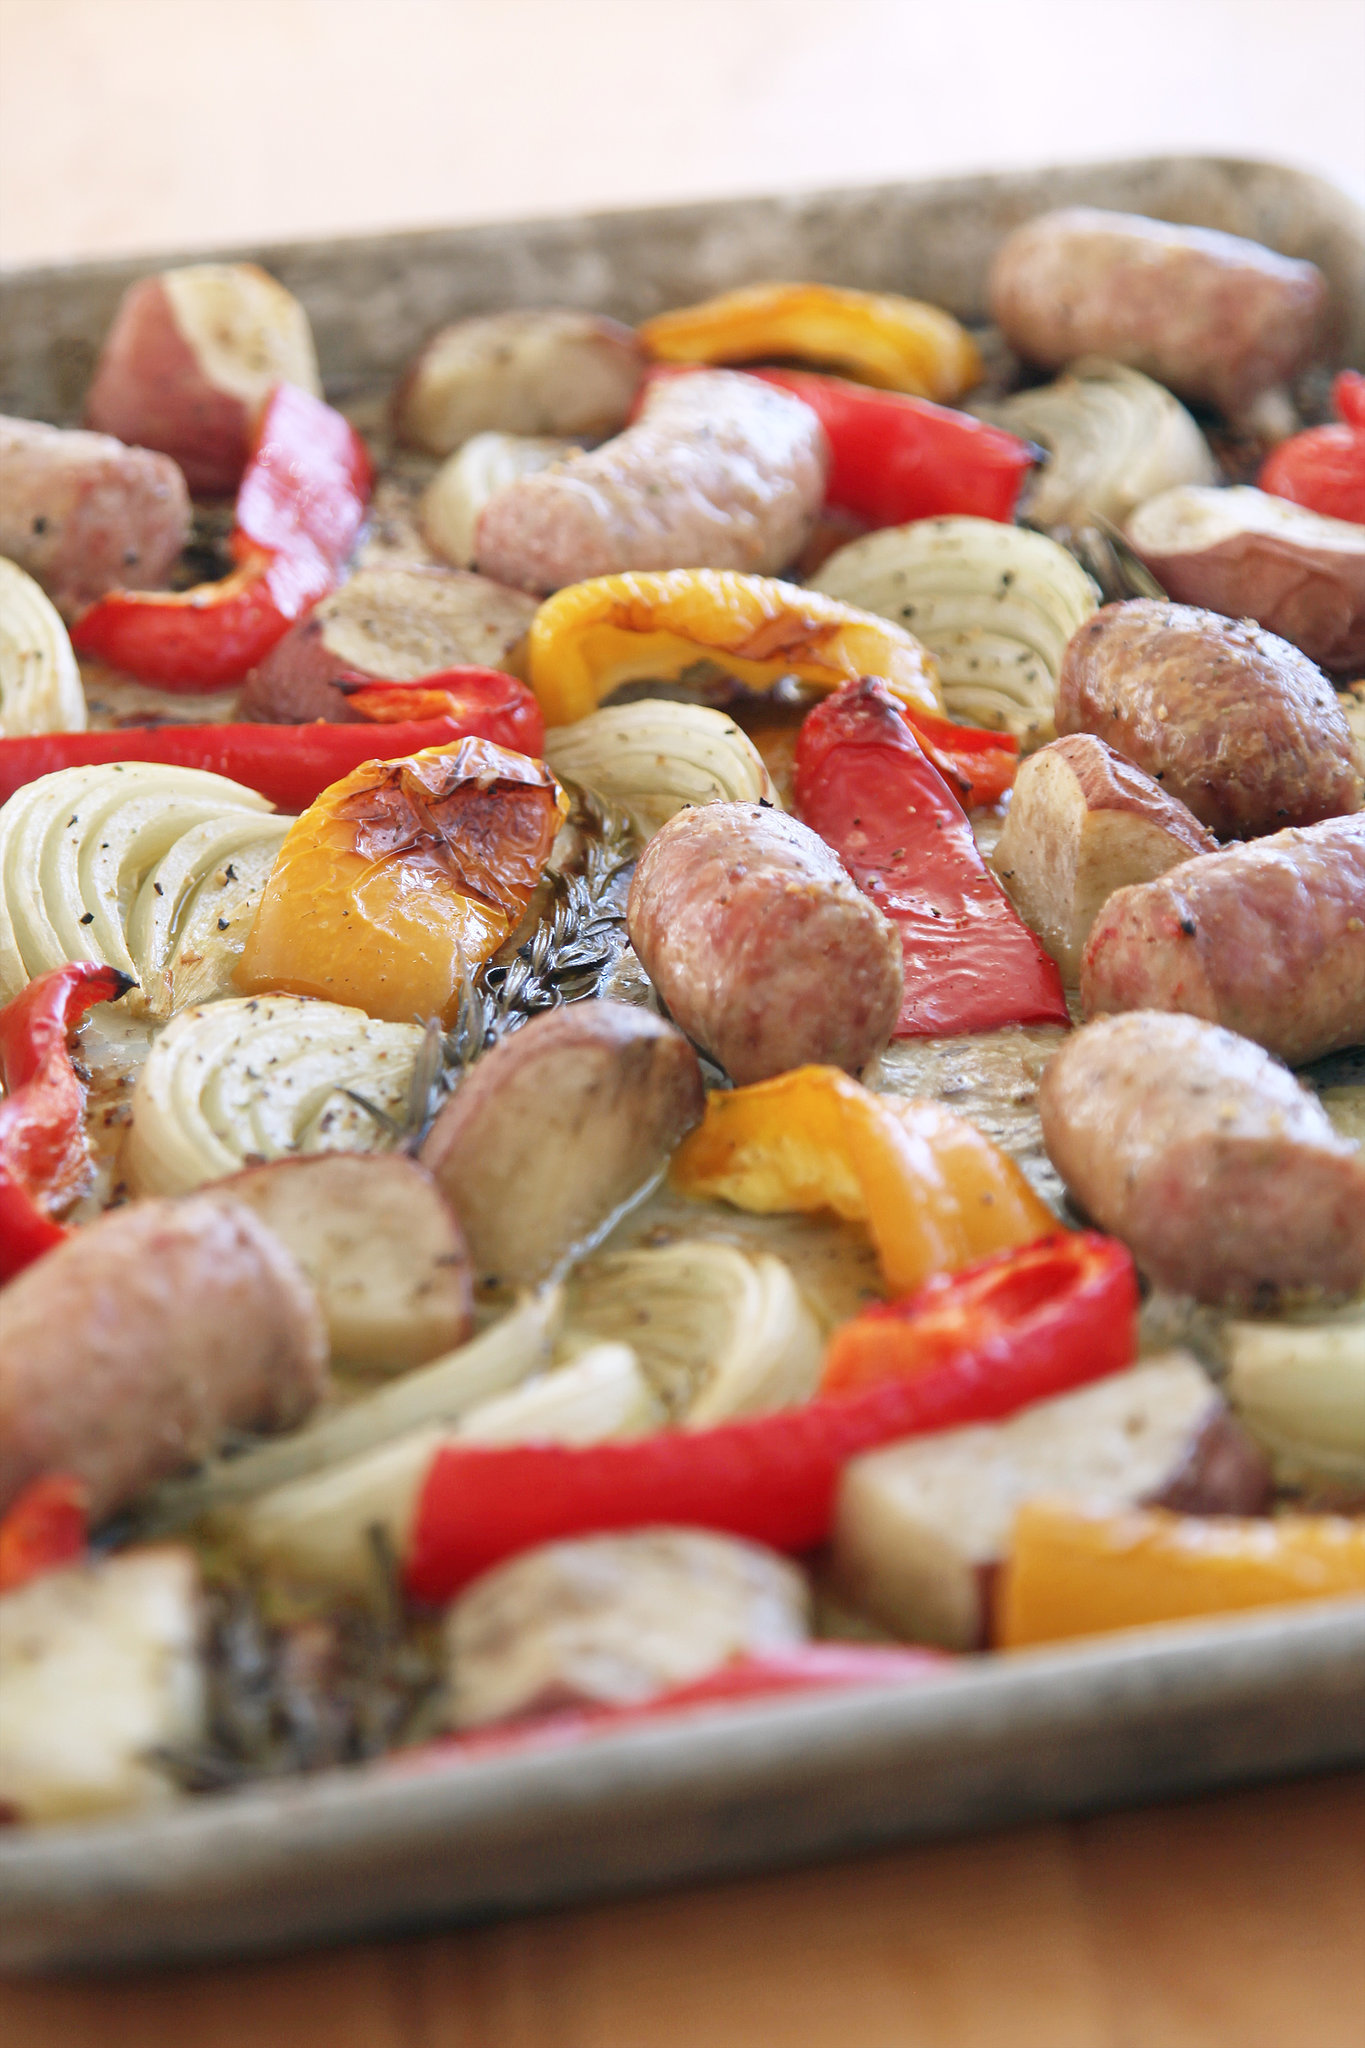 Roasted Italian Sausage With Onions and Peppers | POPSUGAR Food